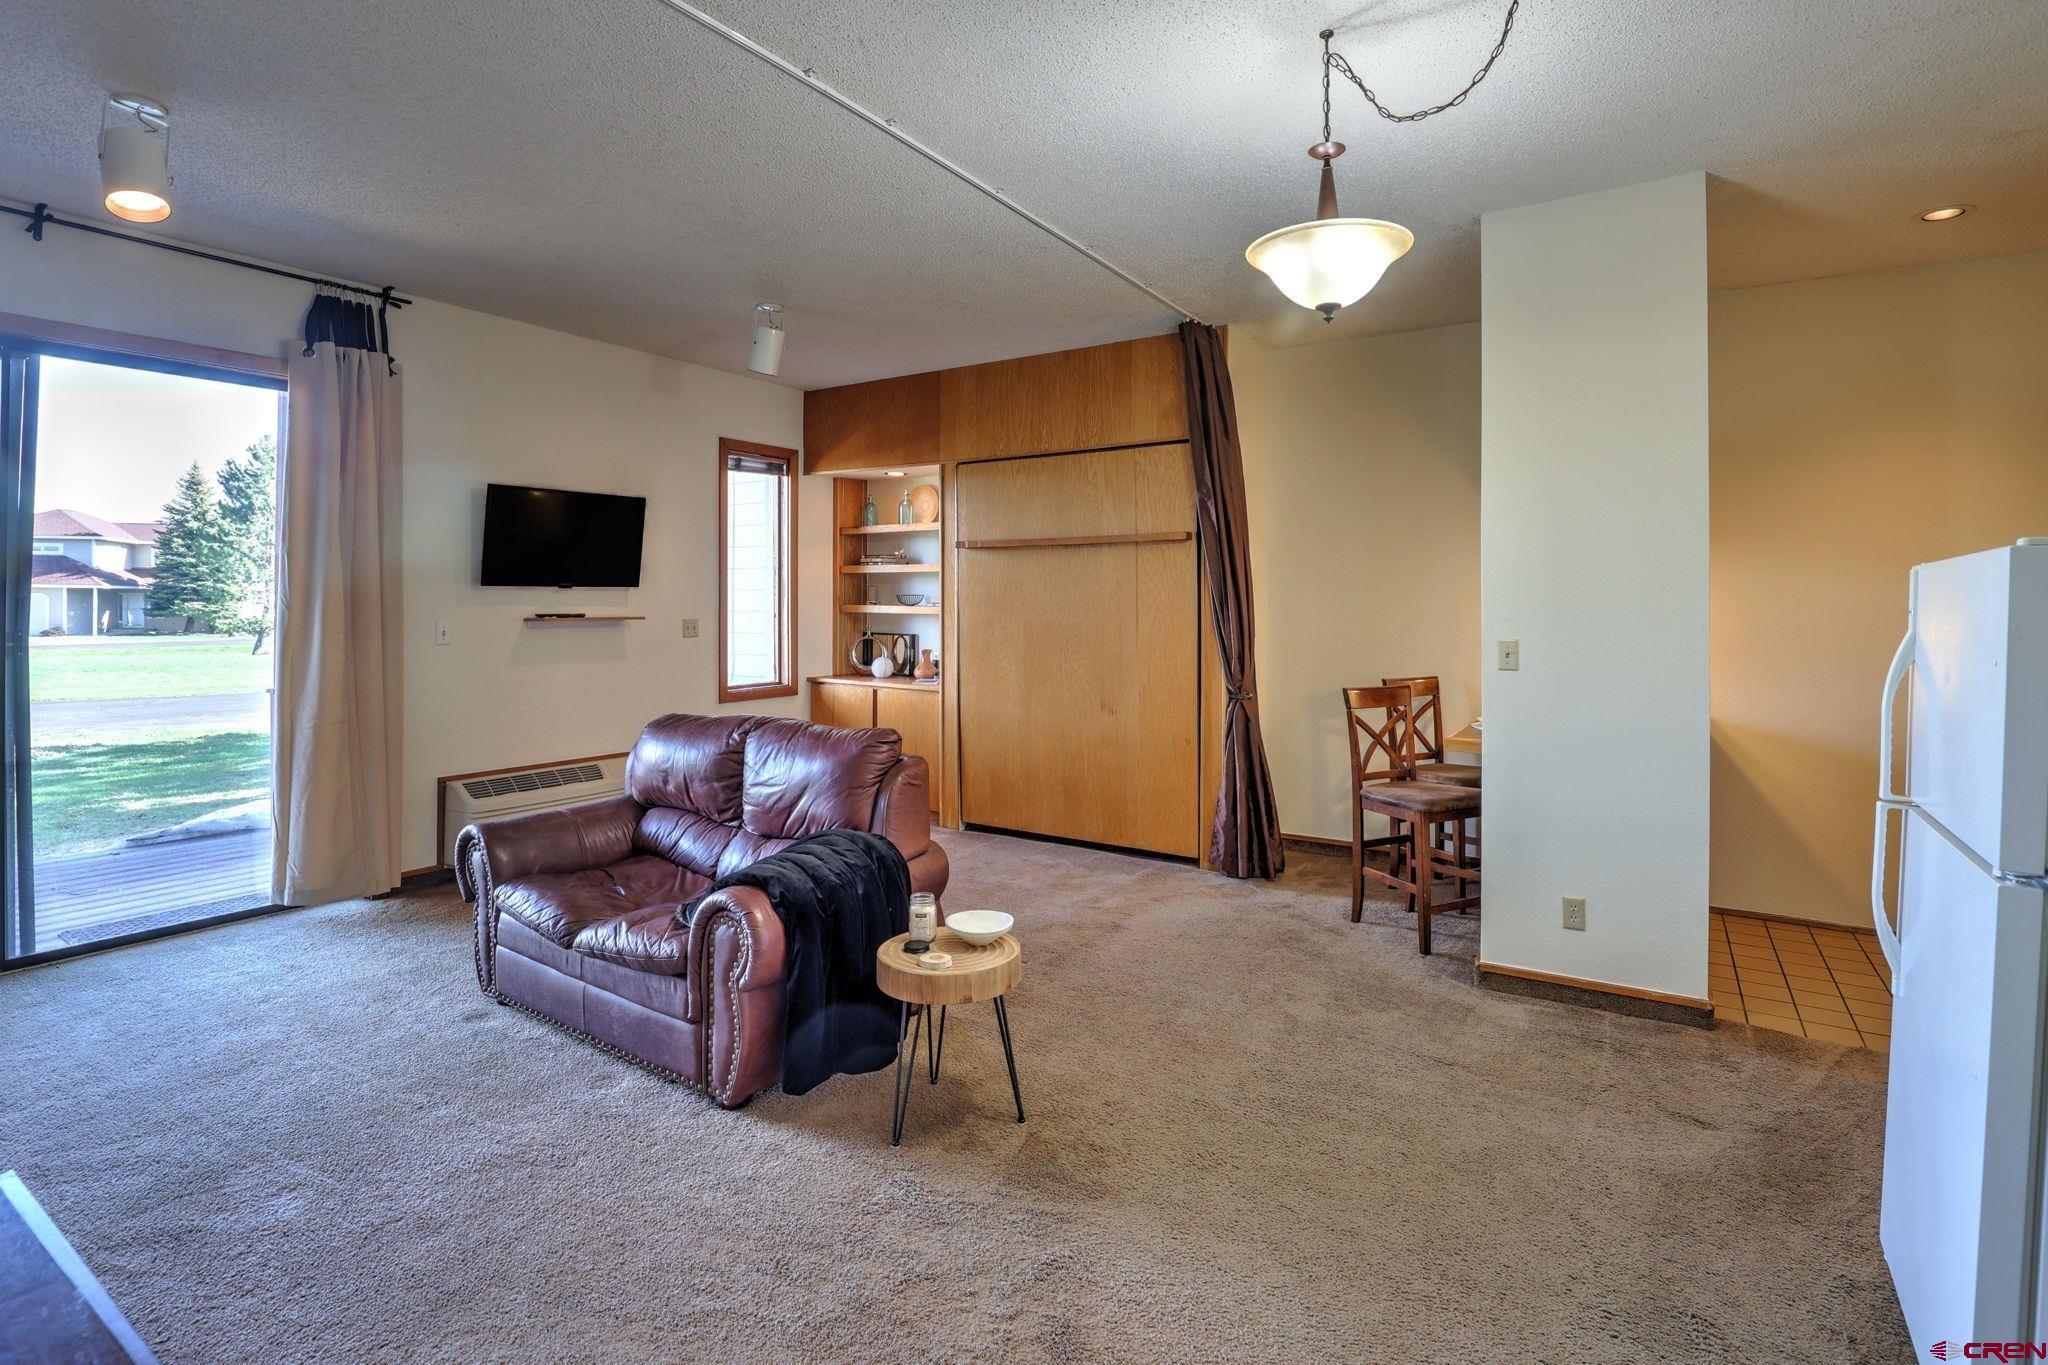 89 Valley View Drive, #3191, Pagosa Springs, CO 81147 Listing Photo  7